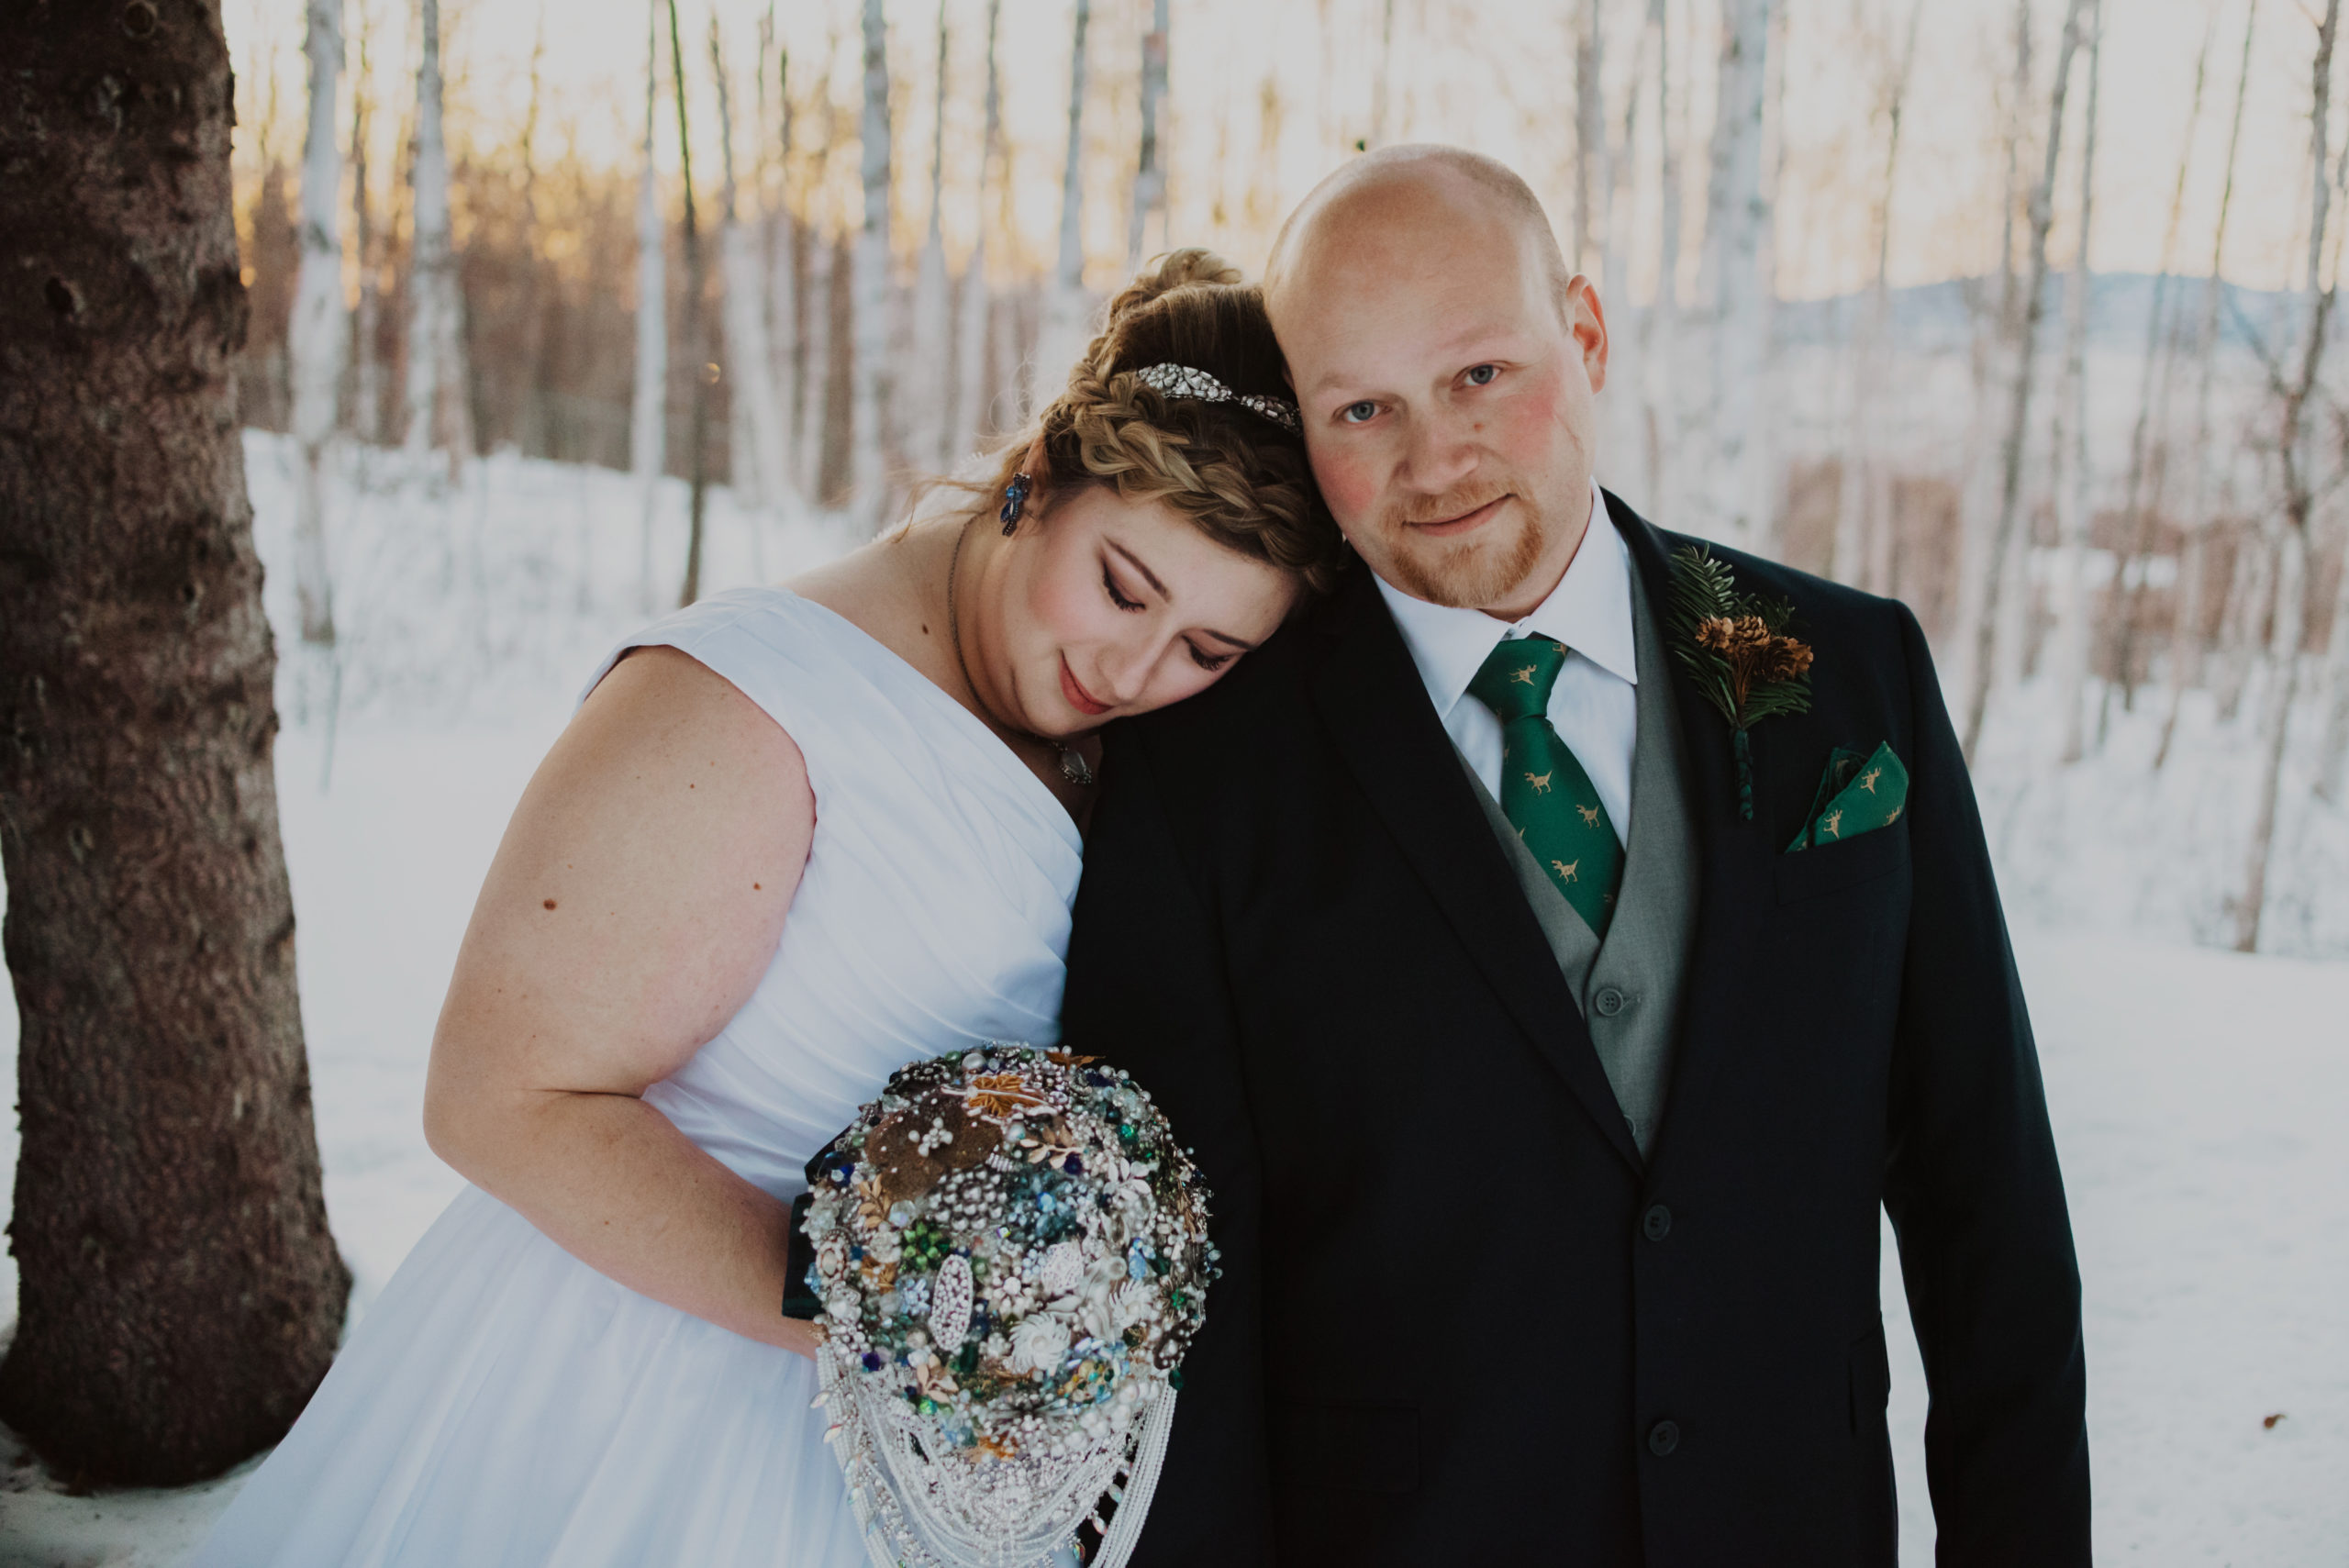 The Lindholm wedding in Fairbanks, Alaska on a below-zero day under the alpenglow at Huffman Manor.